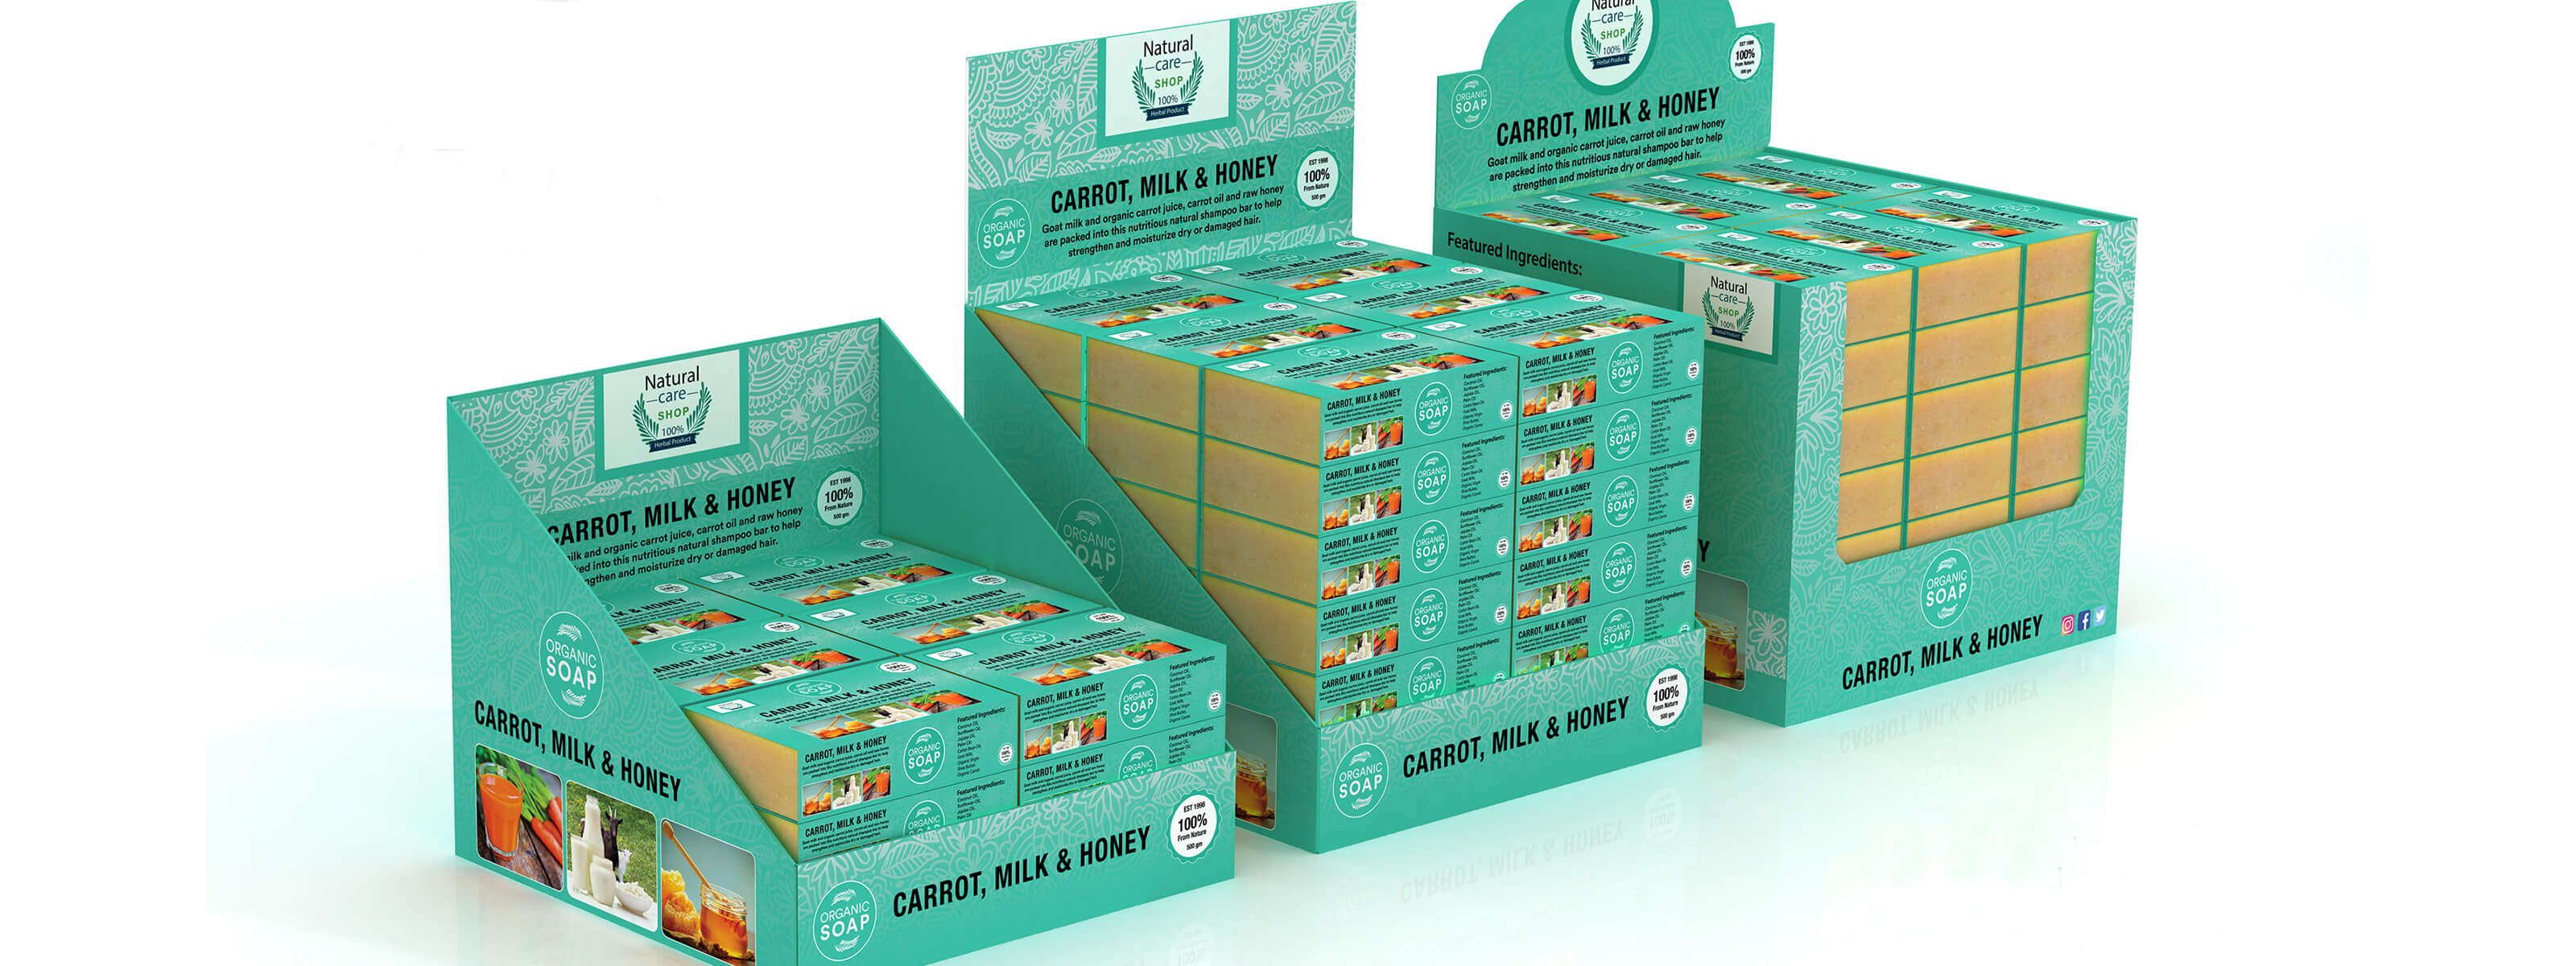 Popular and Classic Cardboard Display Boxes